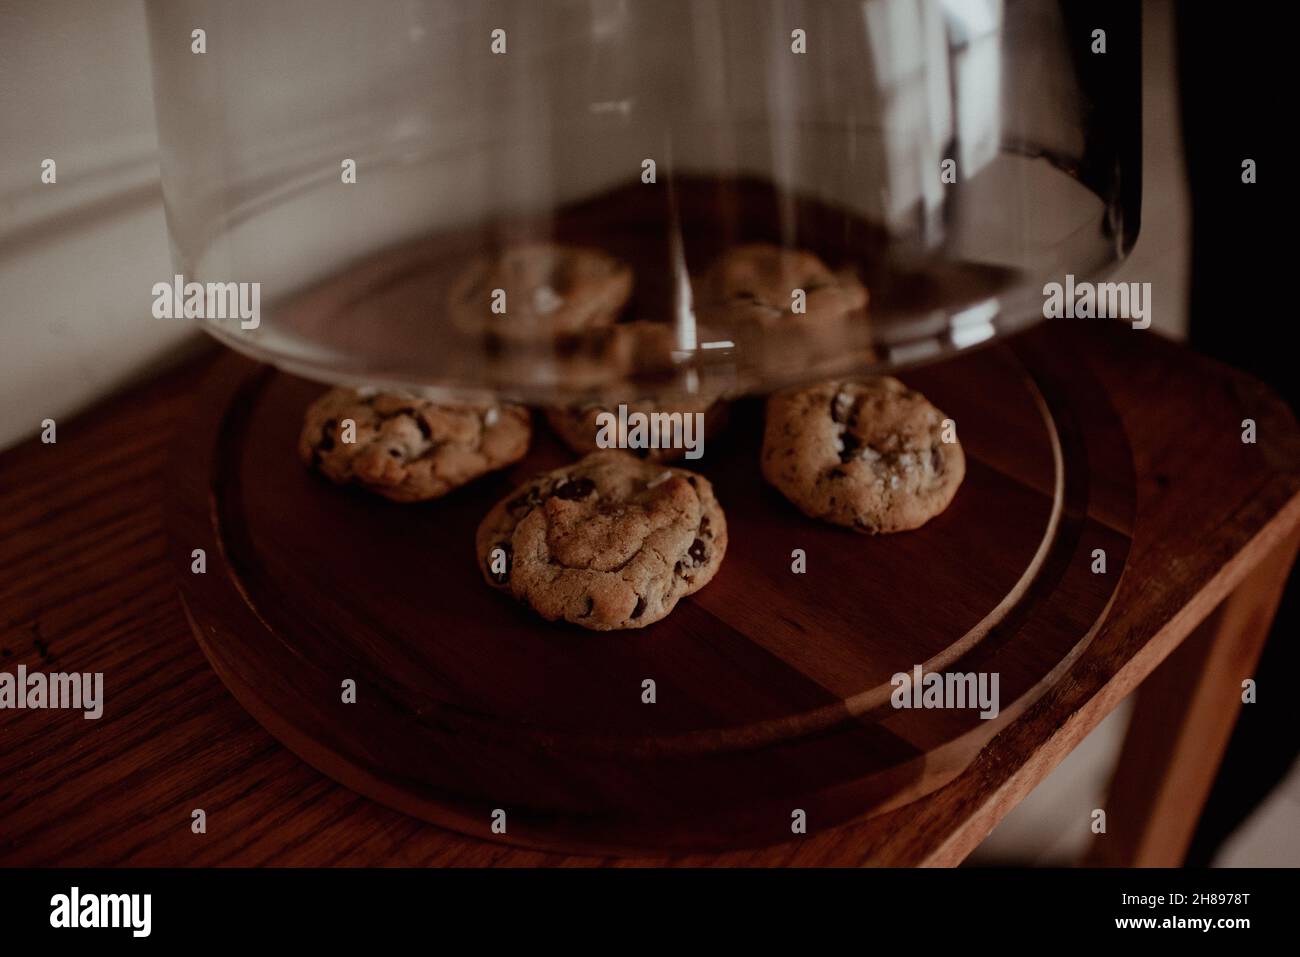 Lifting glass pastry display to reveal freshly baked homemade salted chocolate chip cookies. Moody hipster natural lighting on cookies, pastries Stock Photo